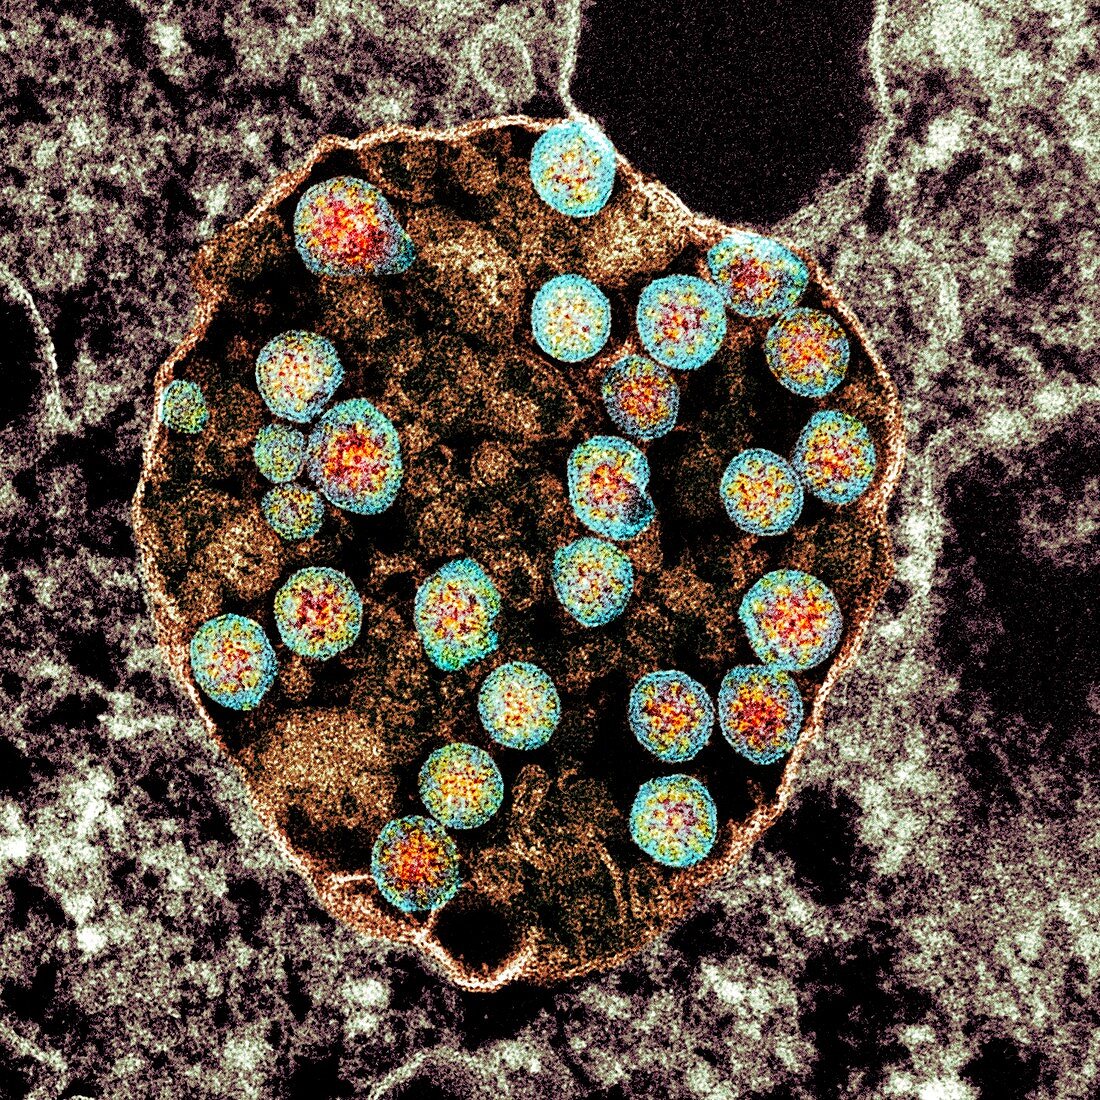 Cell infected with Covid-19 coronavirus particles, TEM